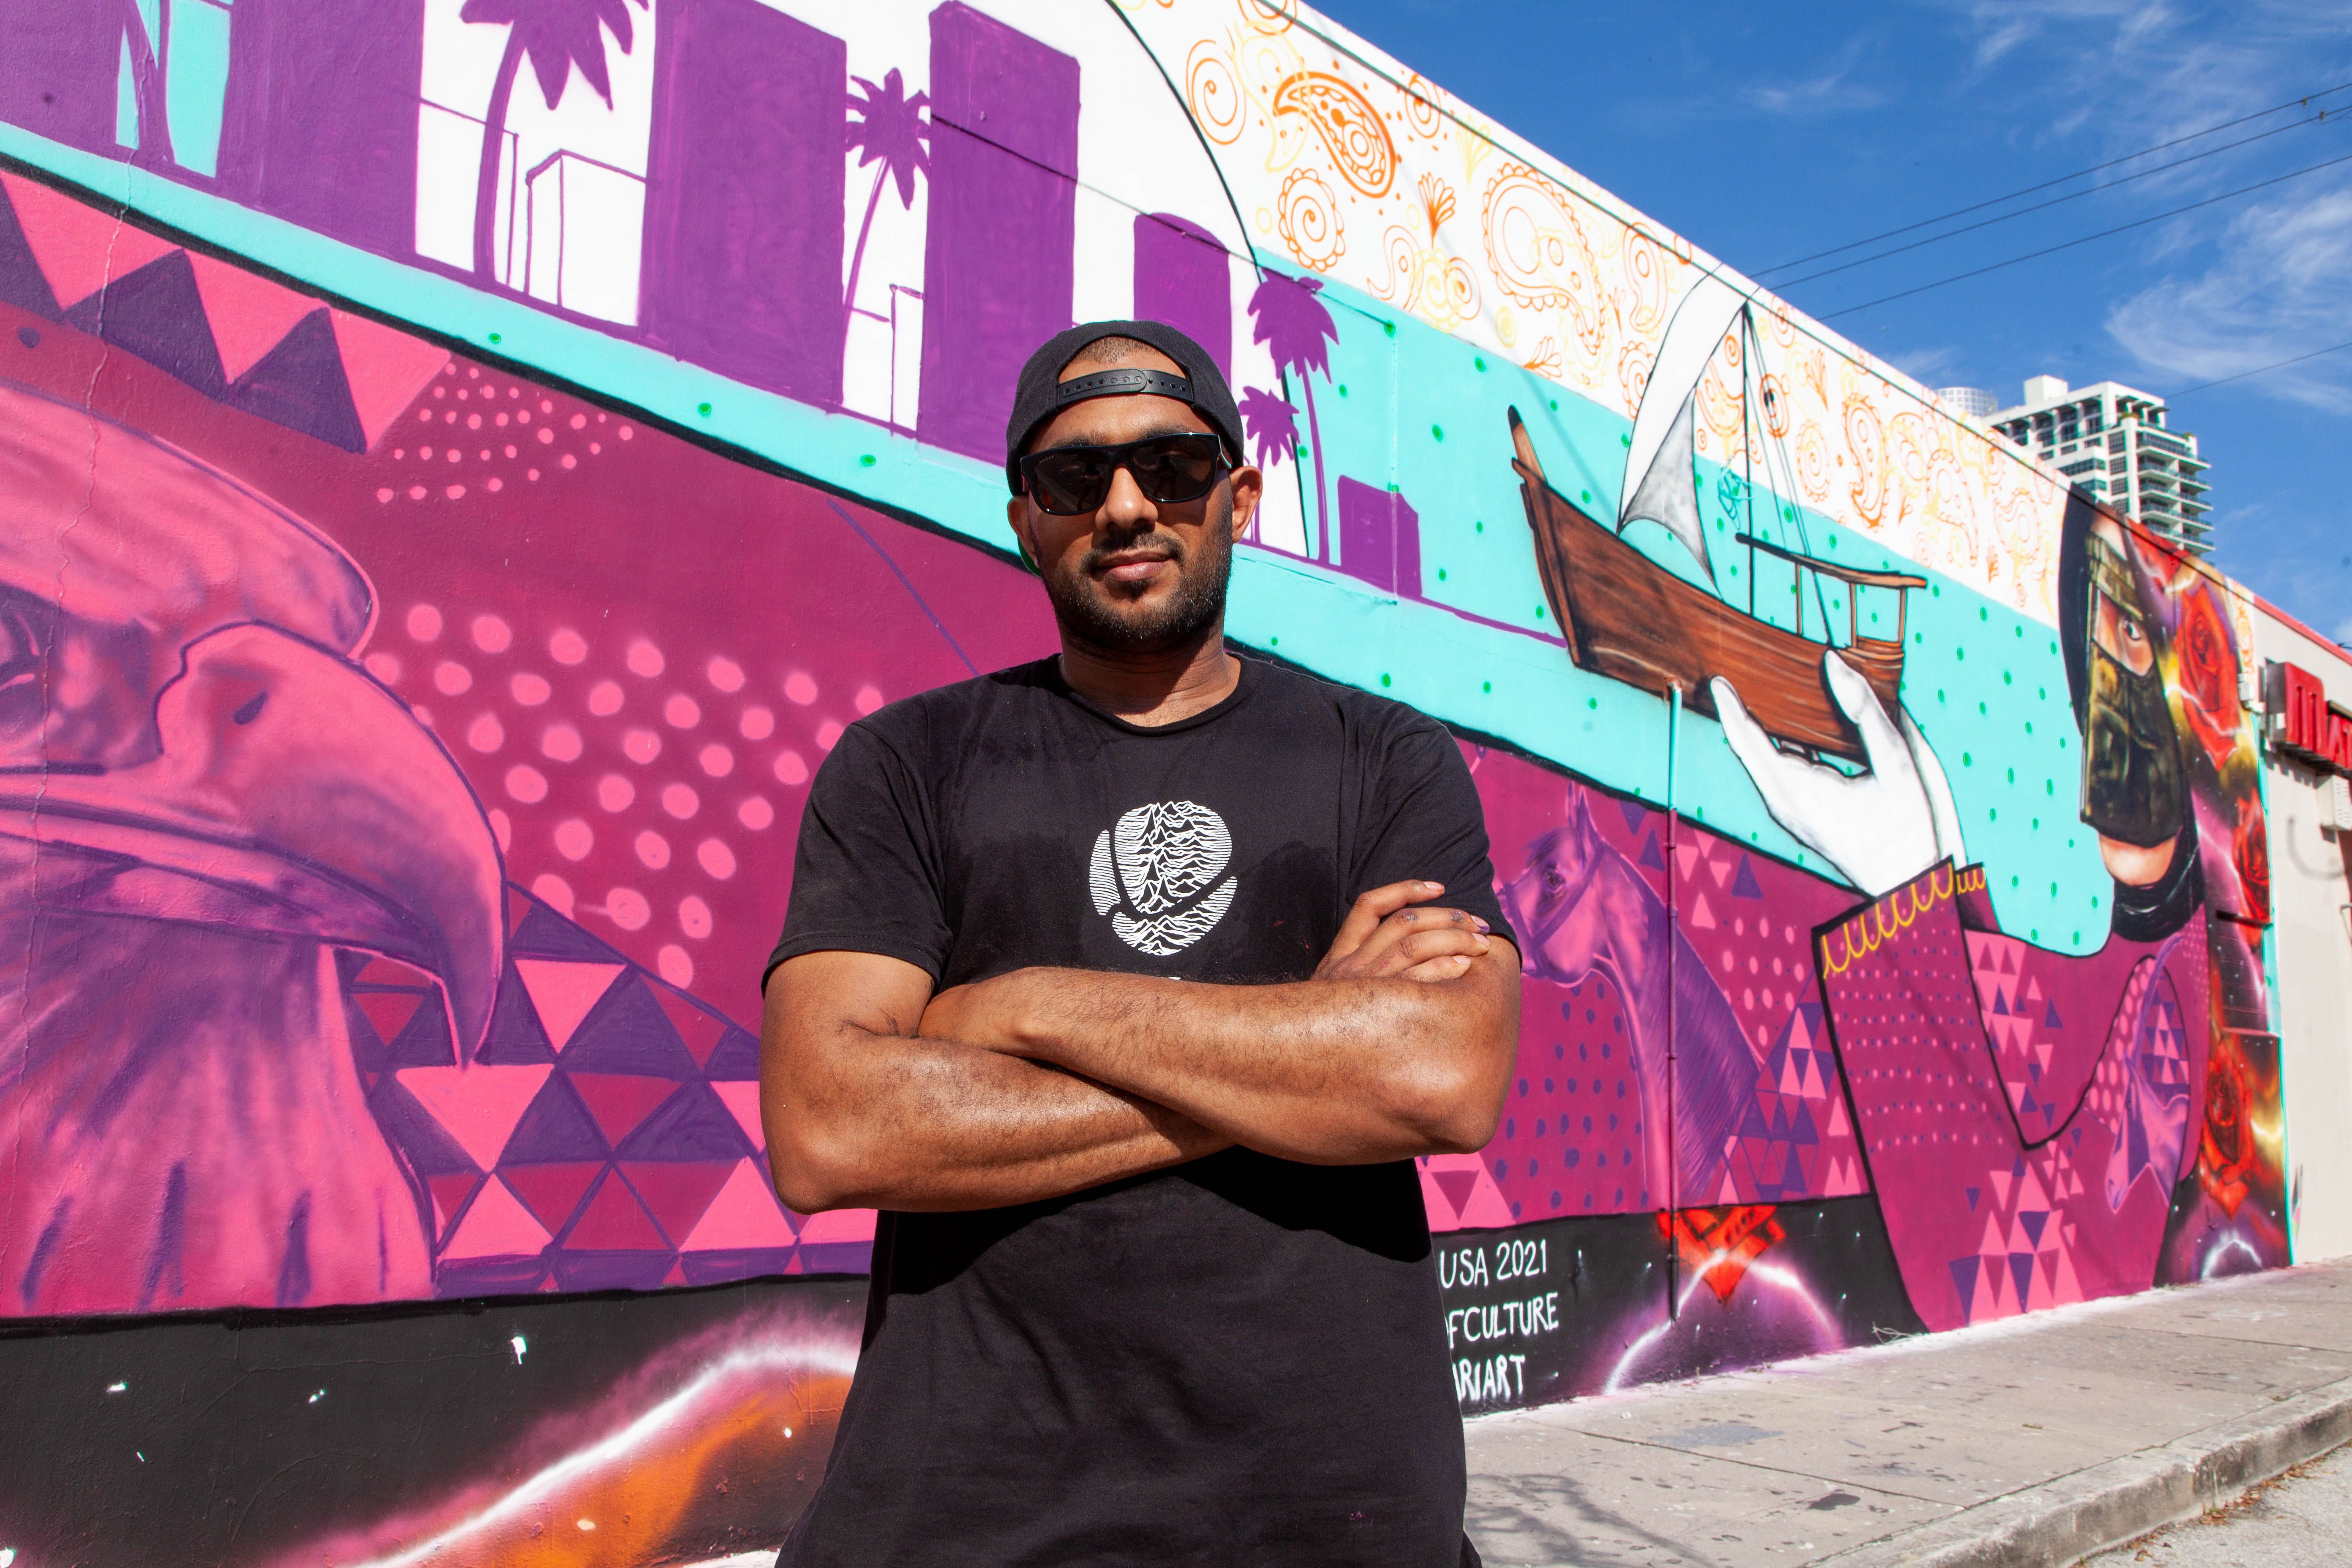 Man wearing a black tshirt and baseball cap stands with arms crossed in front of a colourful JEDARIART mural in Miami.